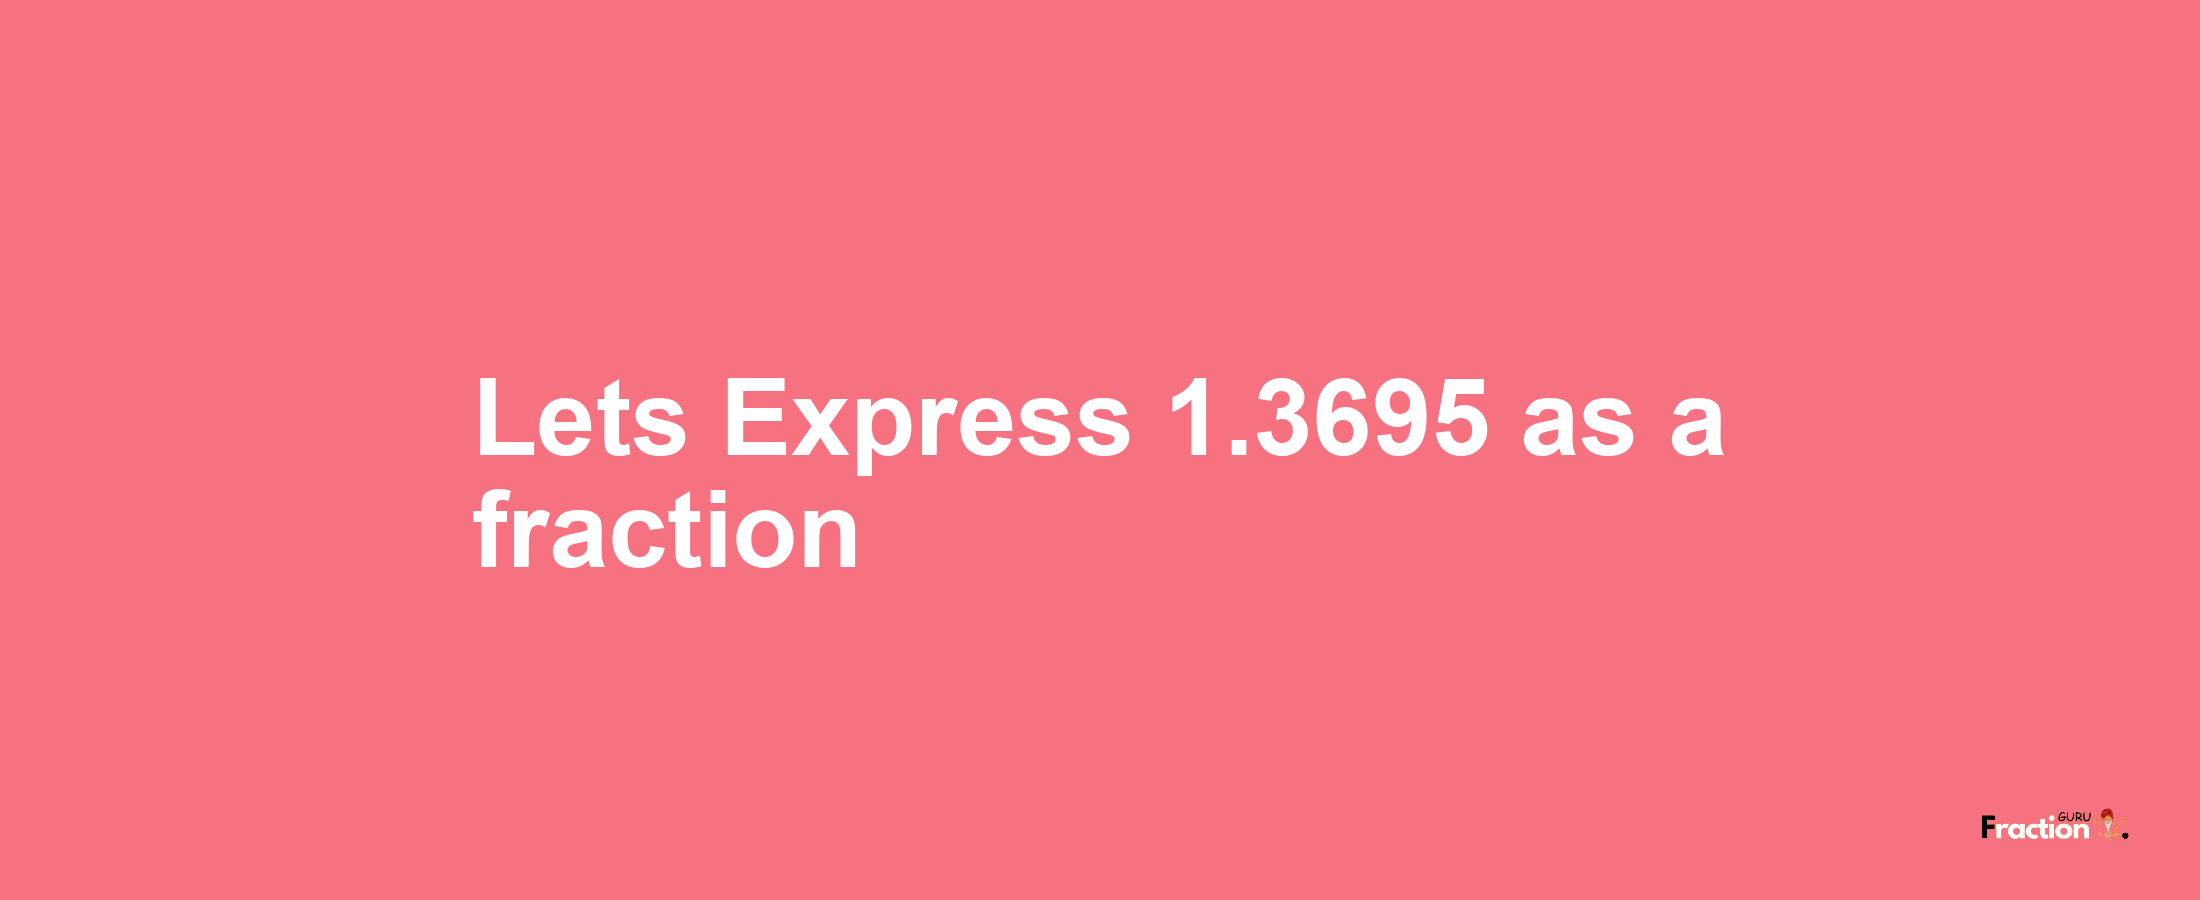 Lets Express 1.3695 as afraction